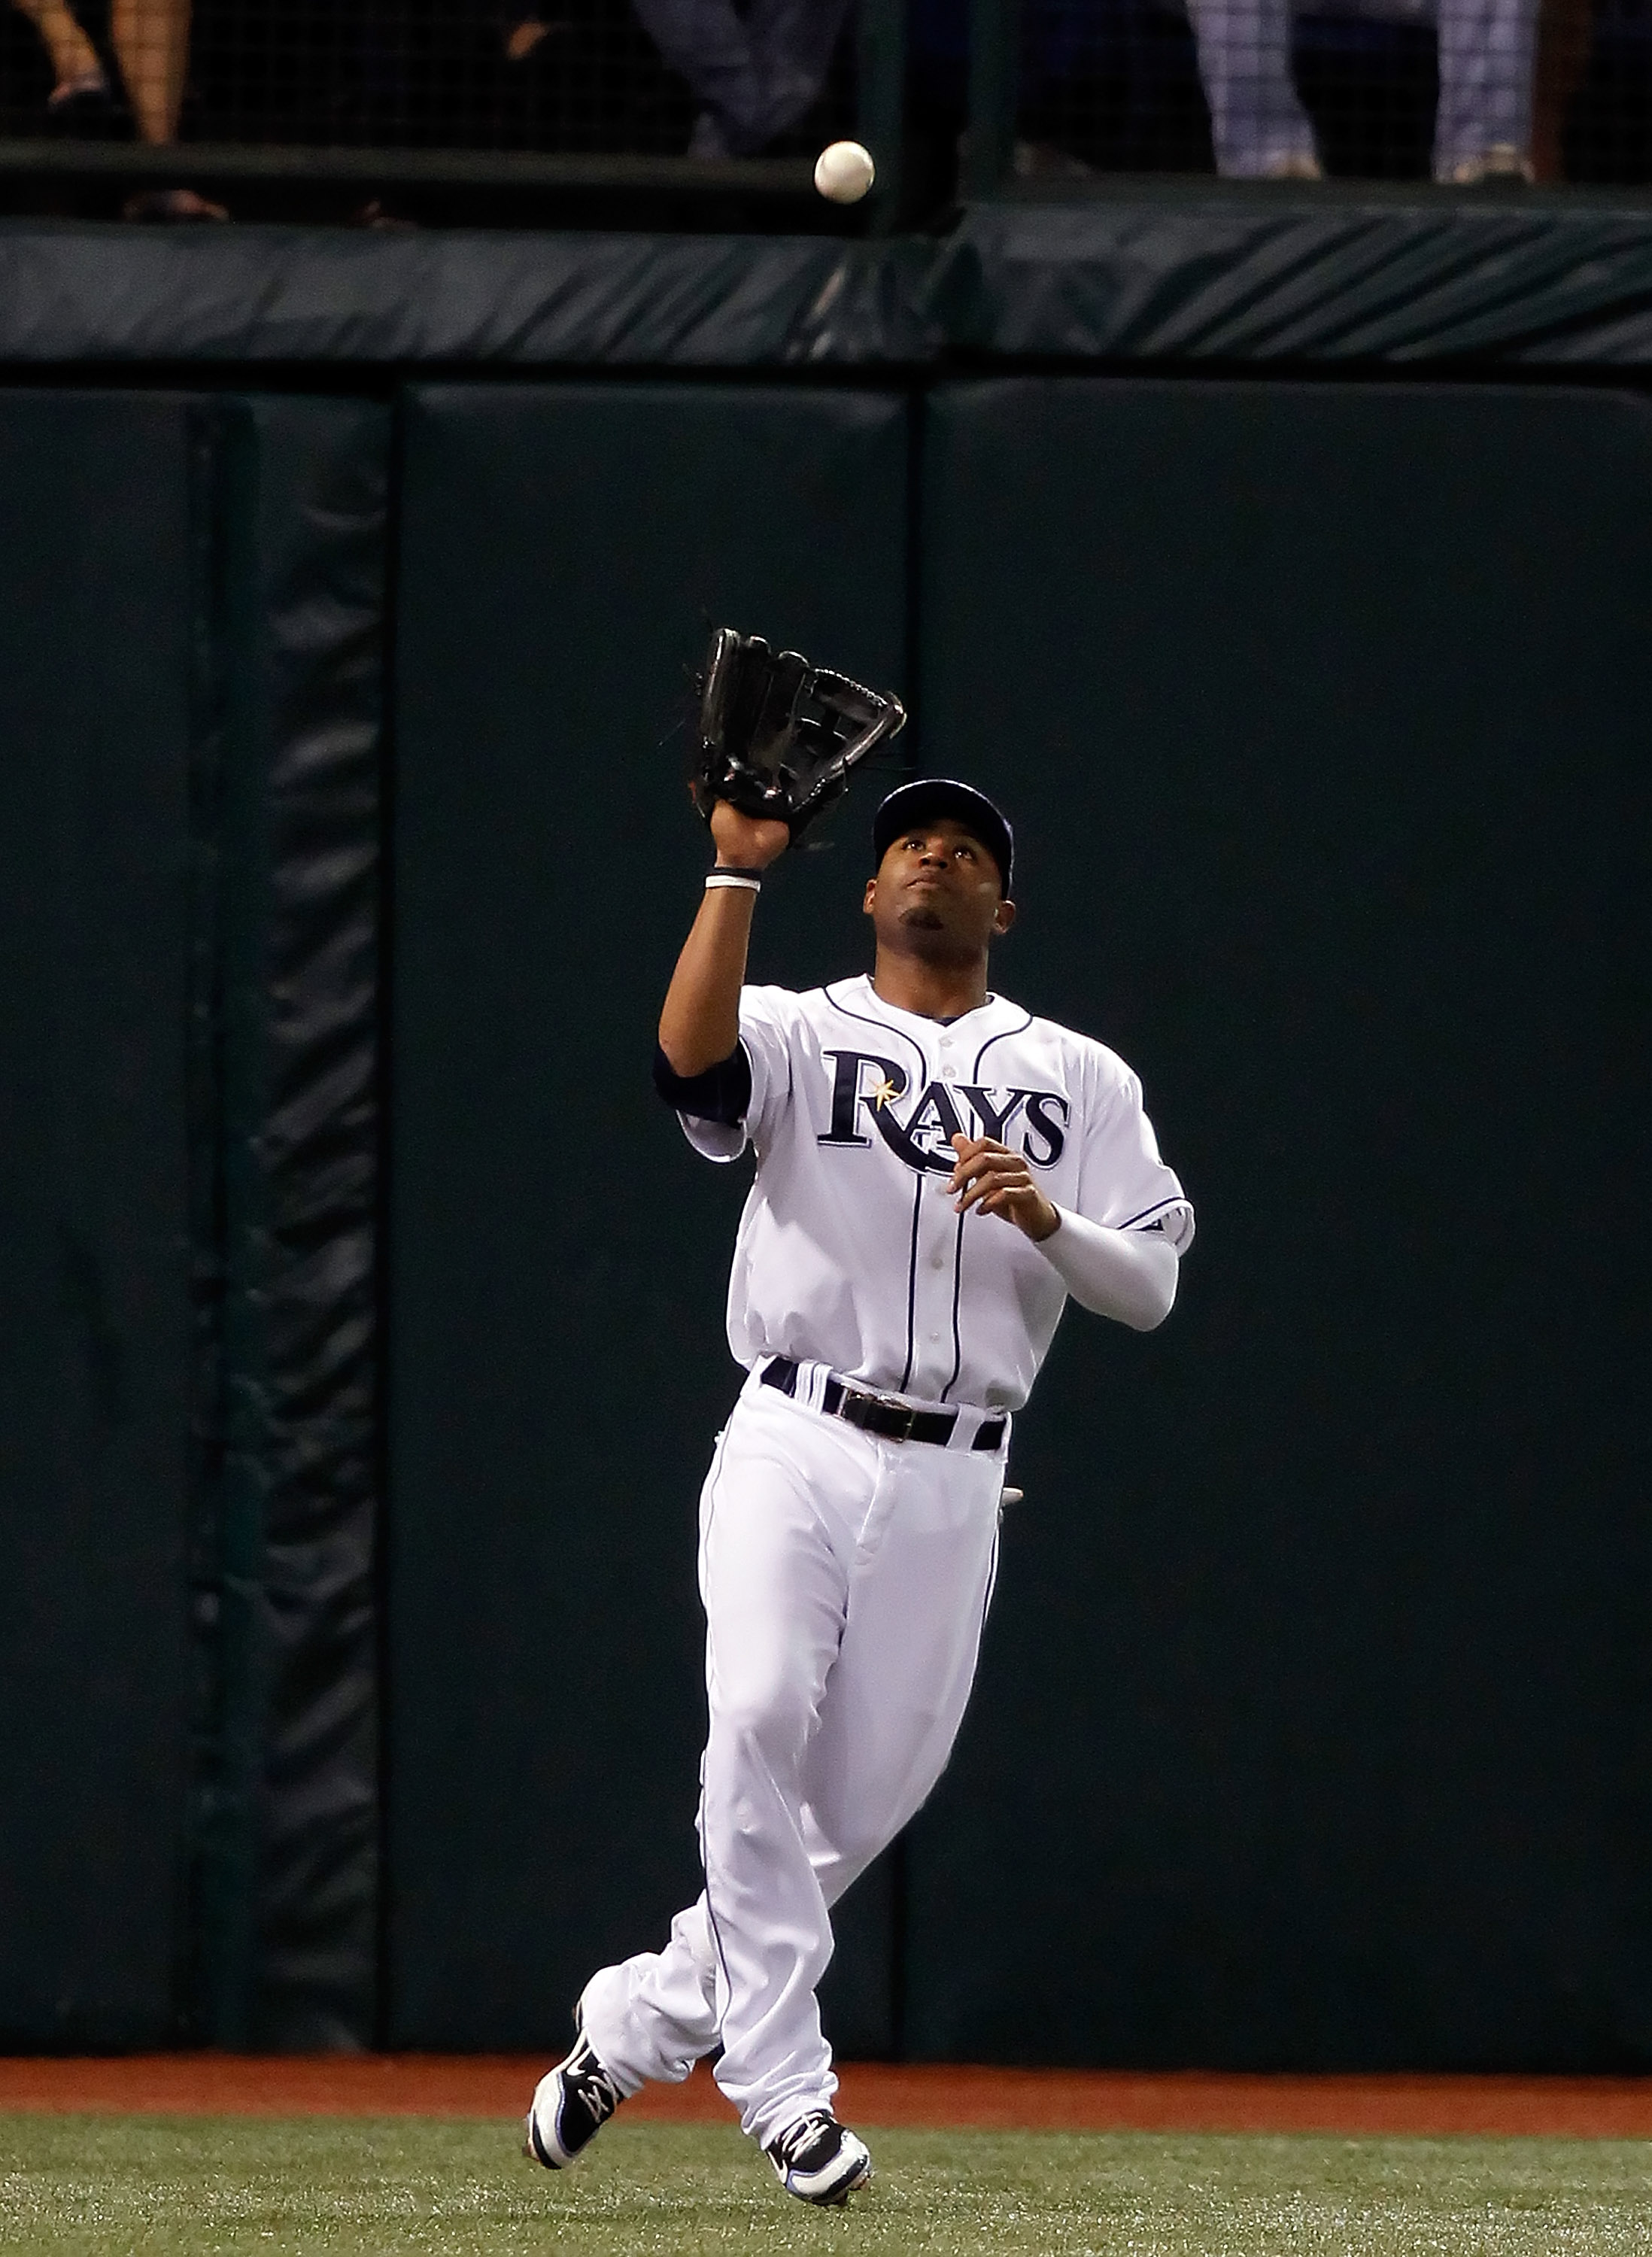 ST. PETERSBURG, FL - SEPTEMBER 29:  Outfielder Carl Crawford #13 of the Tampa Bay Rays catches a fly ball against the Baltimore Orioles during the game at Tropicana Field on September 29, 2010 in St. Petersburg, Florida.  (Photo by J. Meric/Getty Images)